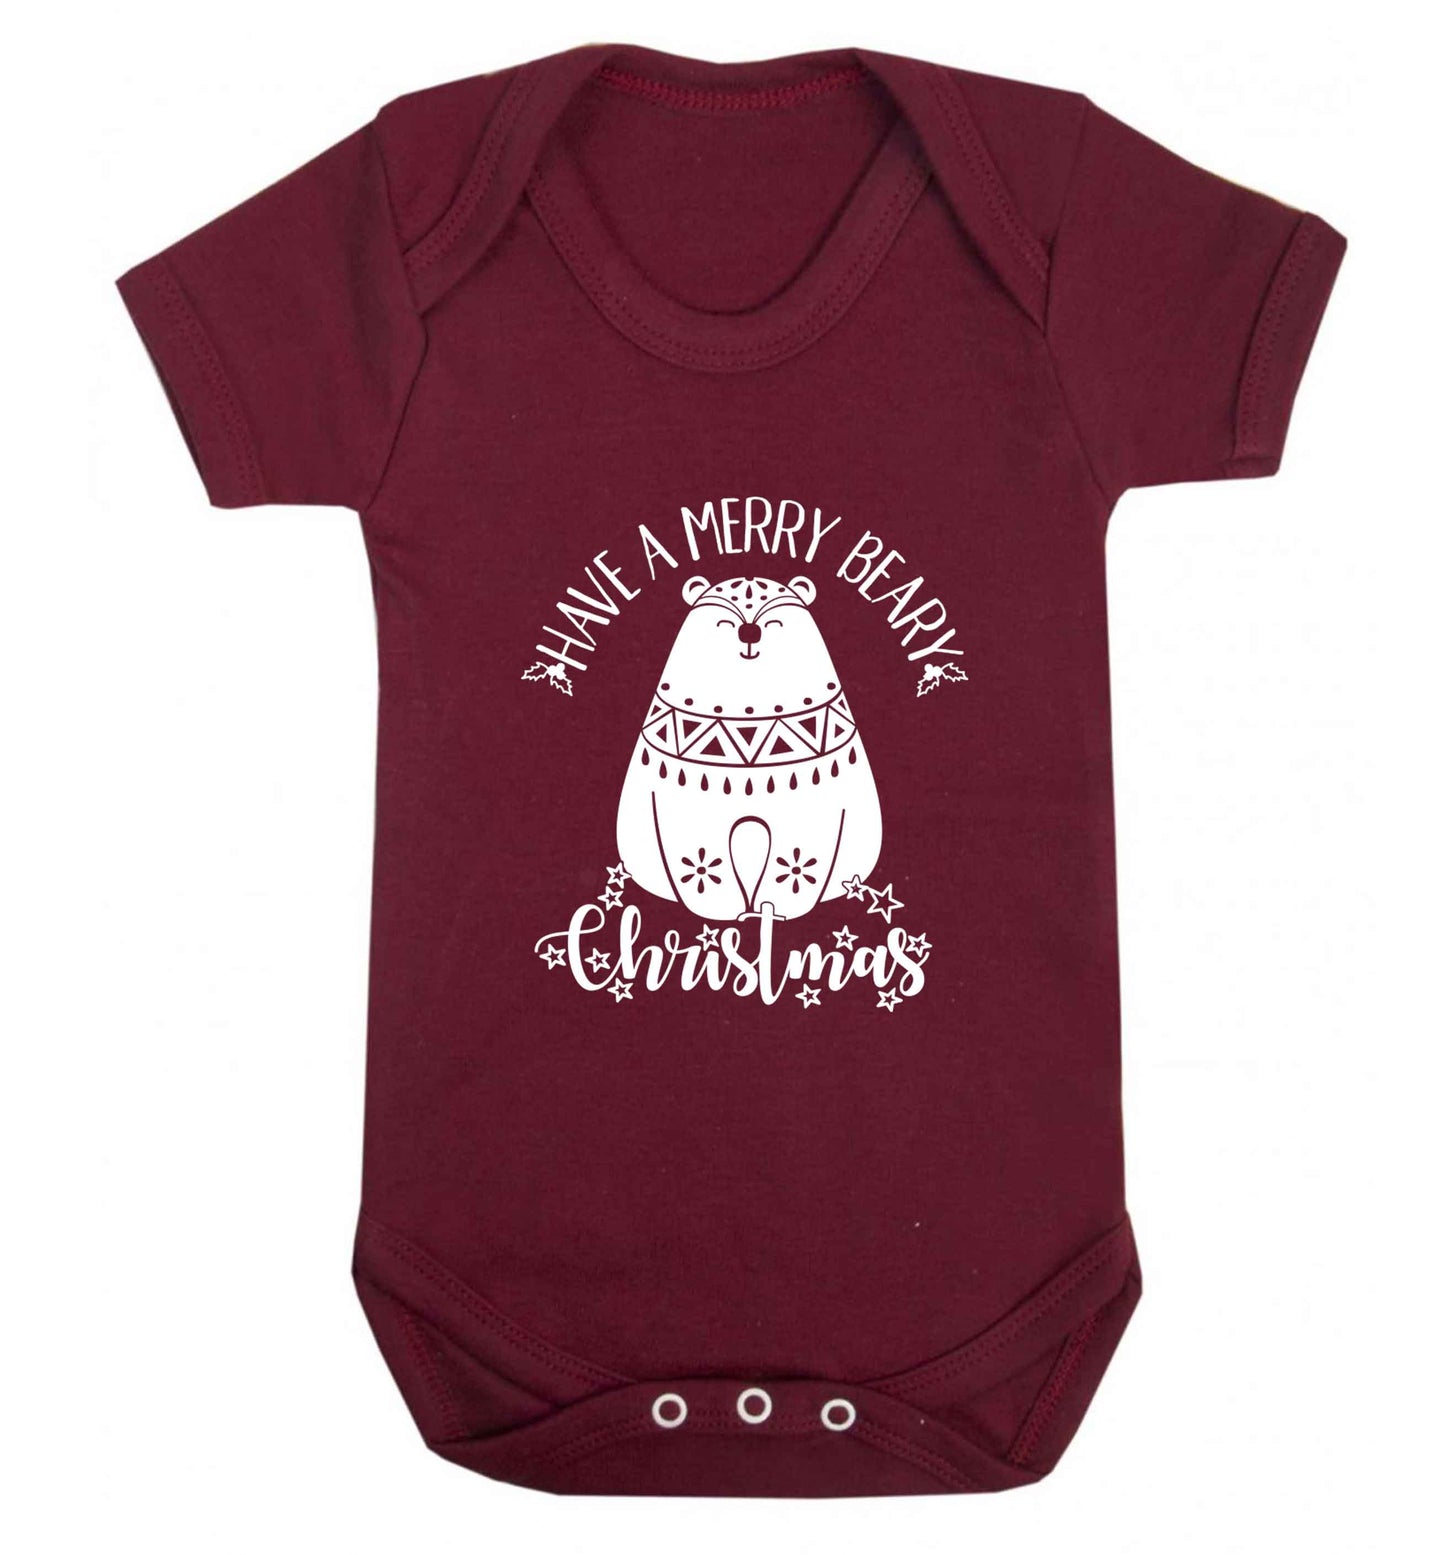 Have a merry beary Christmas Baby Vest maroon 18-24 months